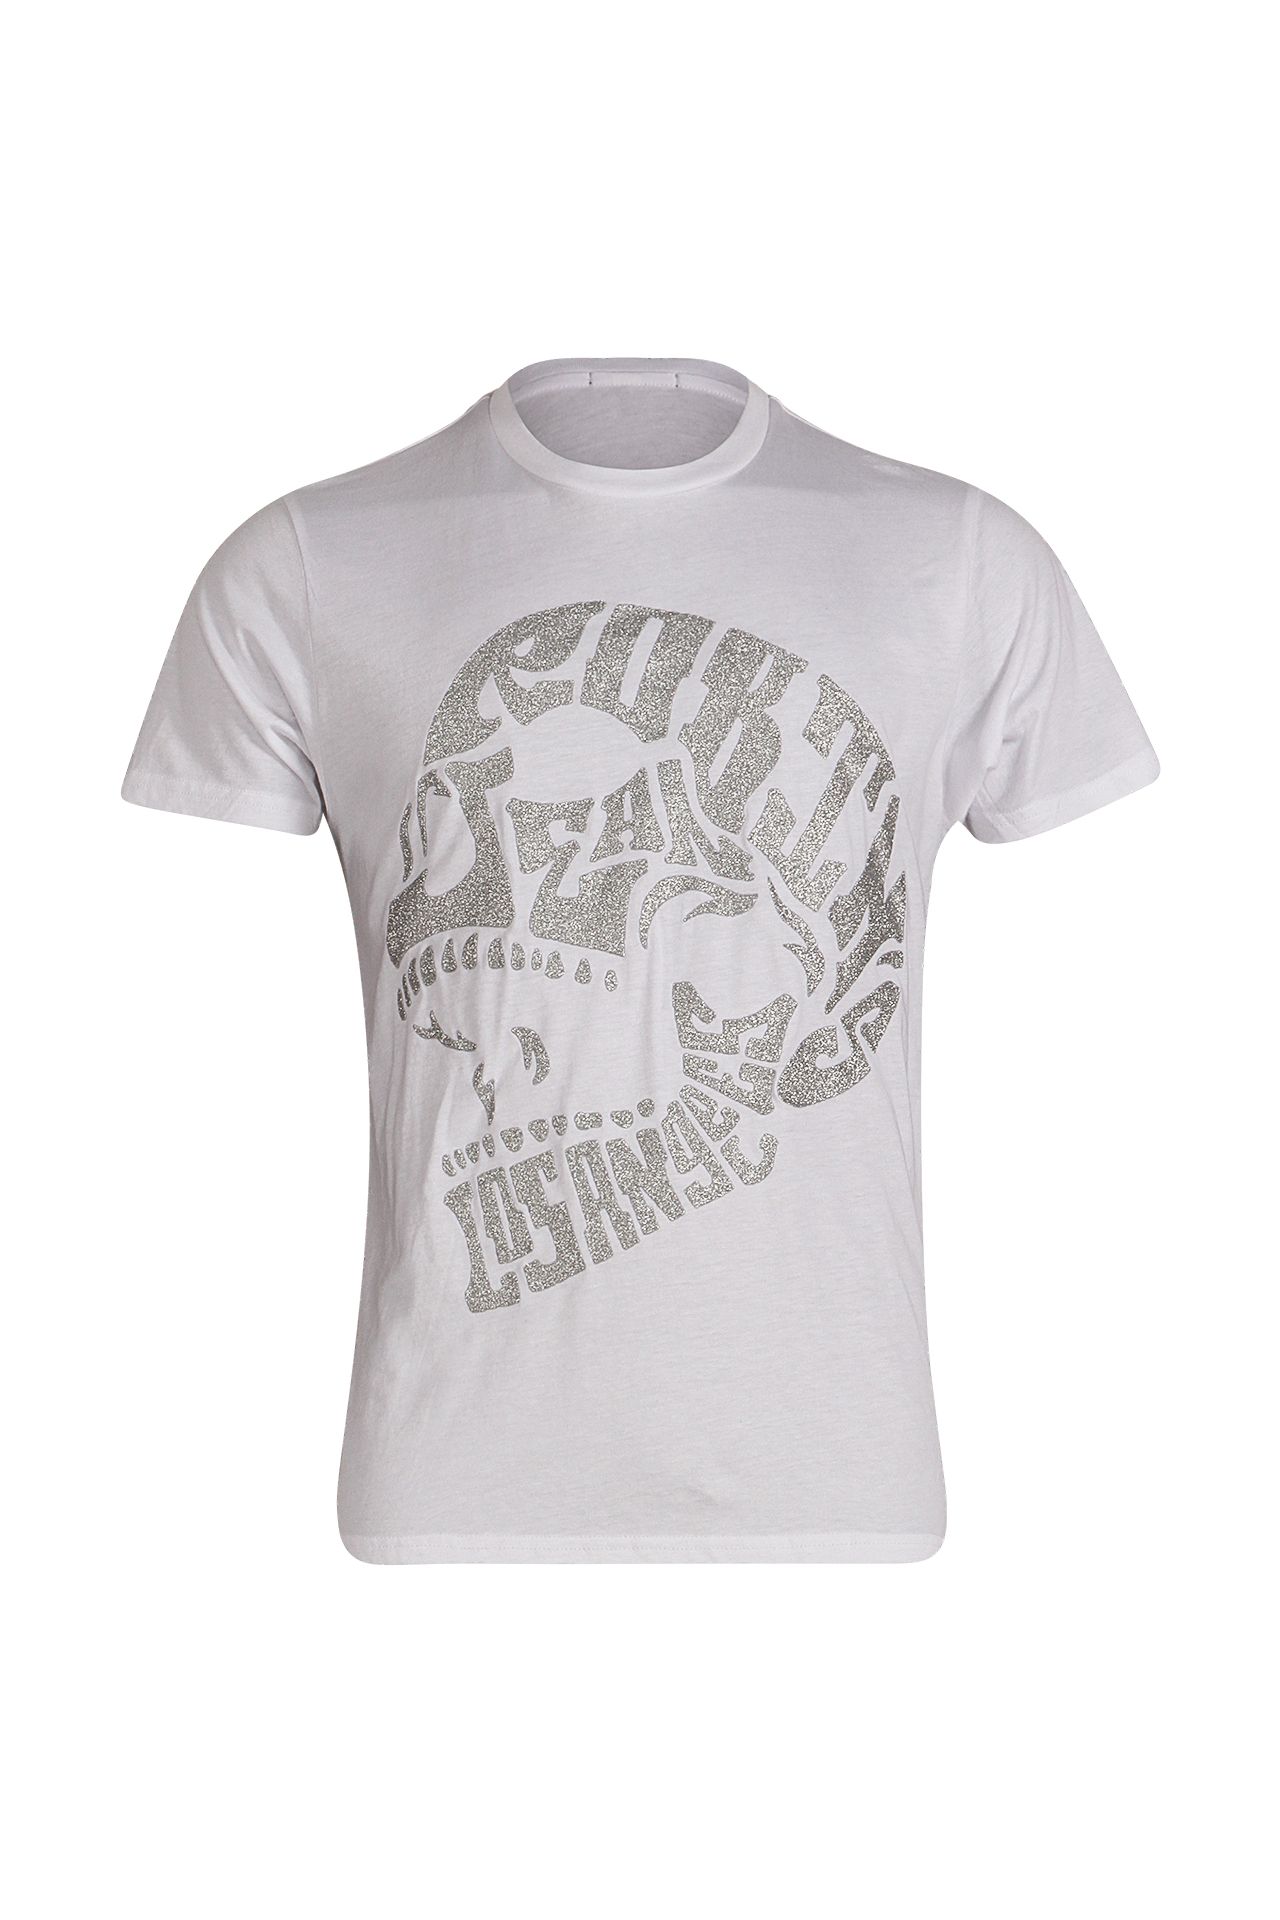 L.A. SILVER SKULL TEE IN WHITE